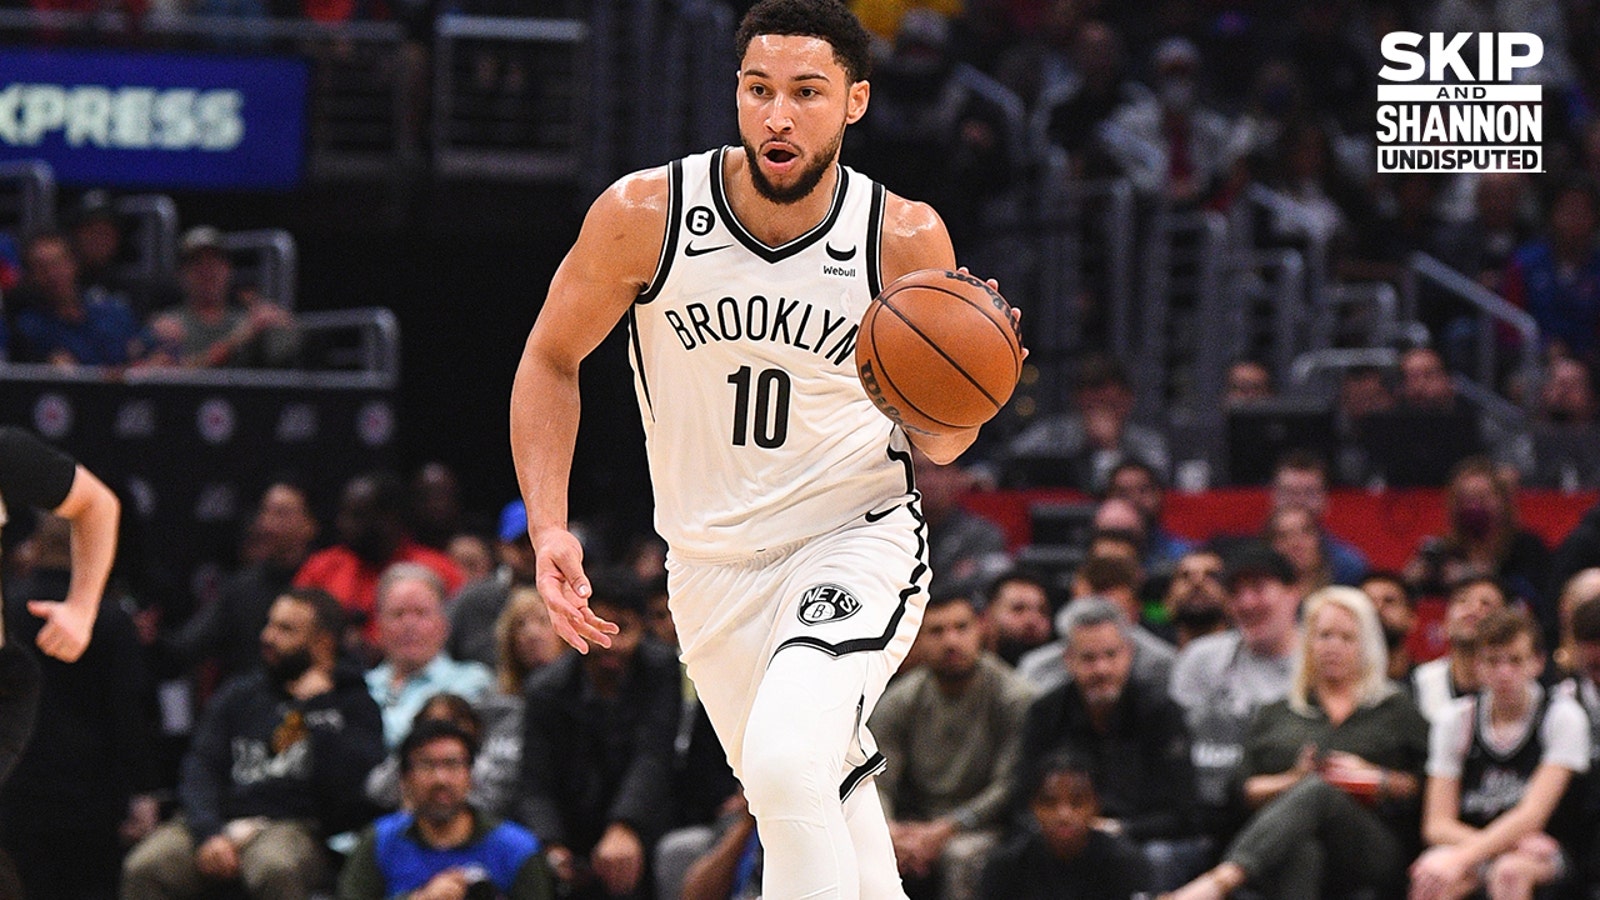 Nets reportedly frustrated with Ben Simmons' availability, level of play 